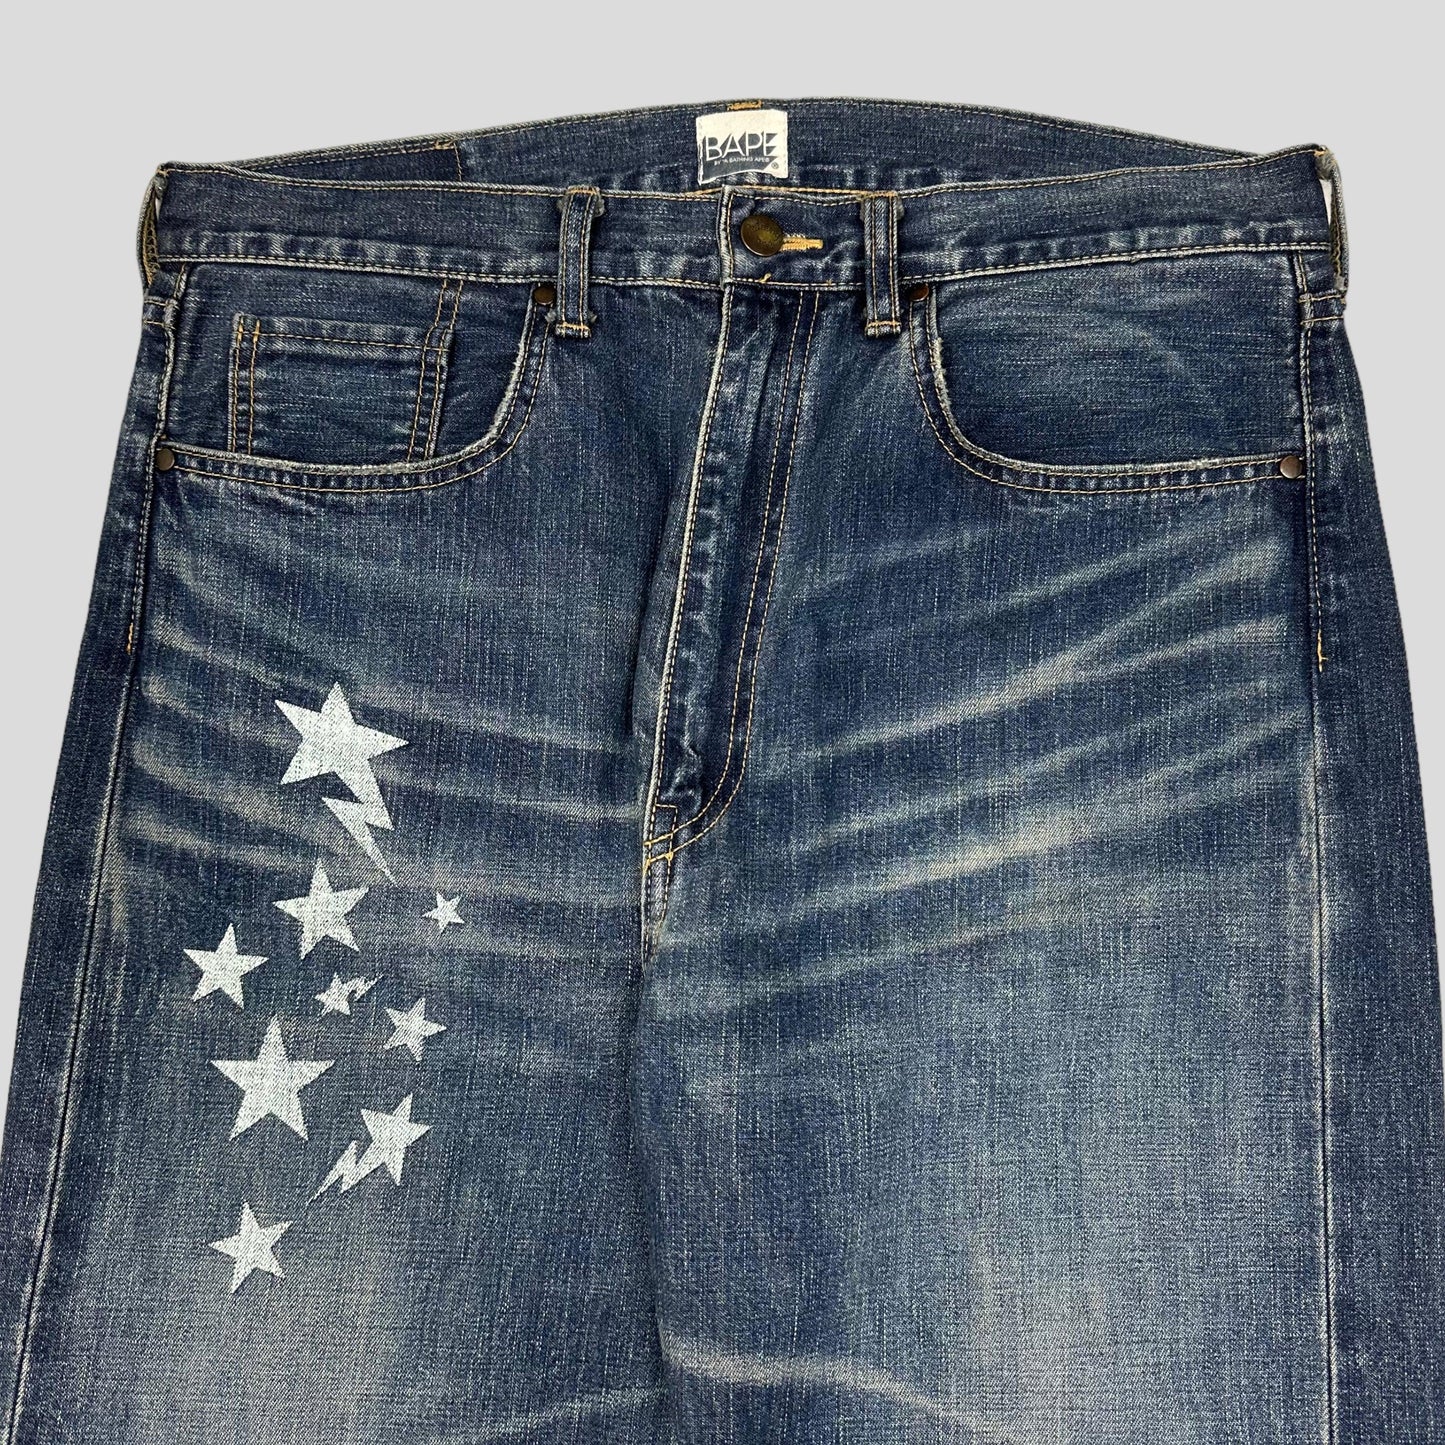 Bape Sta early 00’s Star Jeans - 34 - Known Source